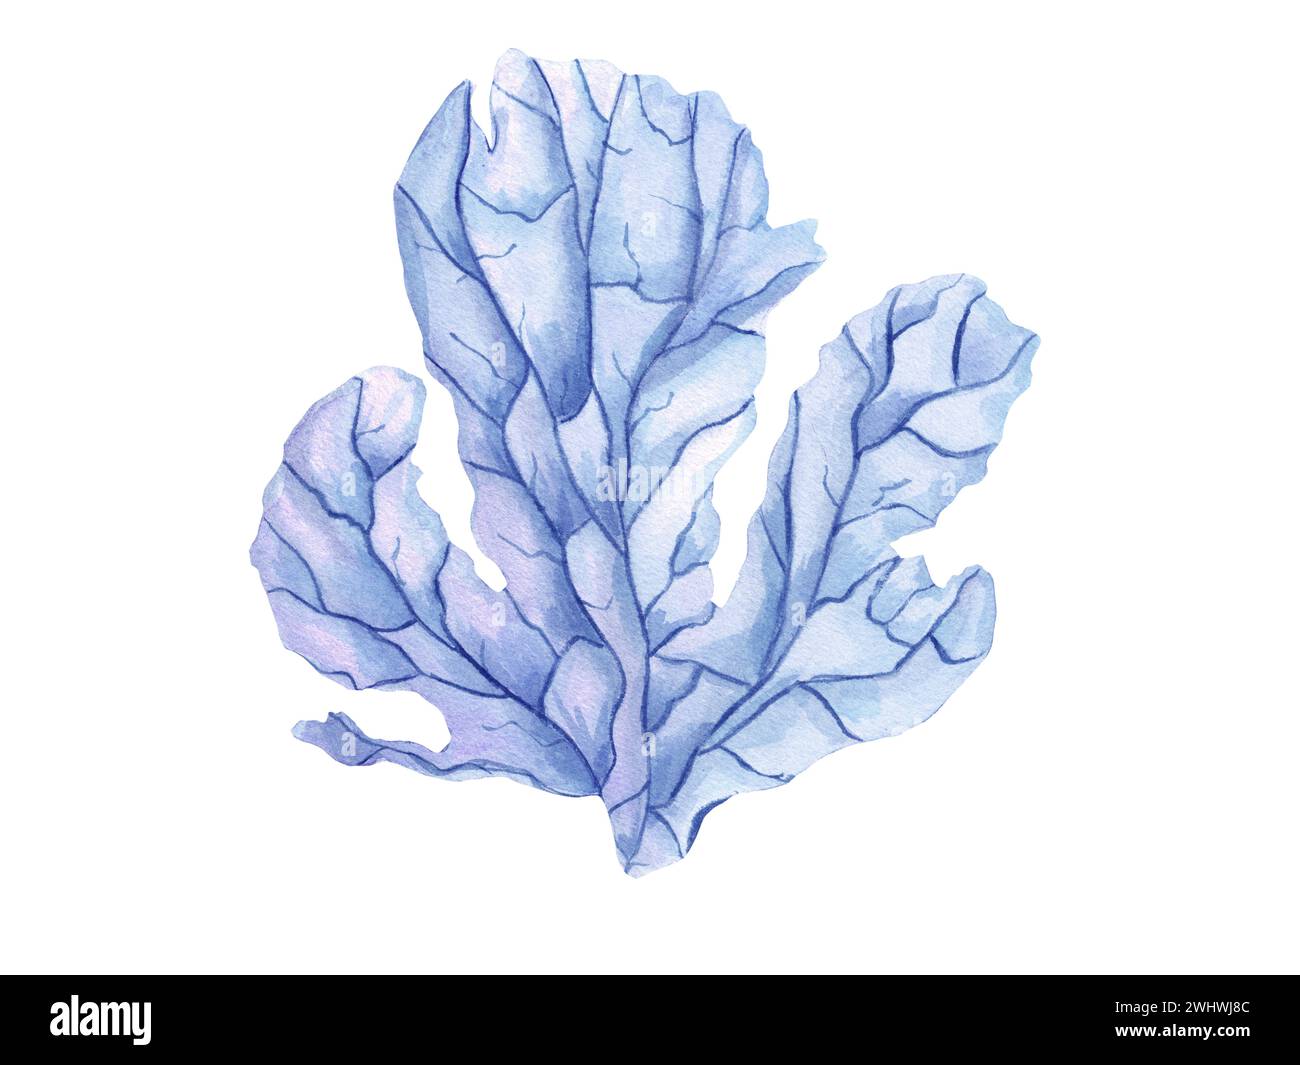 Soft blue coral. Polyp. Hand drawn watercolor illustration with tropical underwater animals. Colorful illustration for clipart, aquarium design. Stock Photo